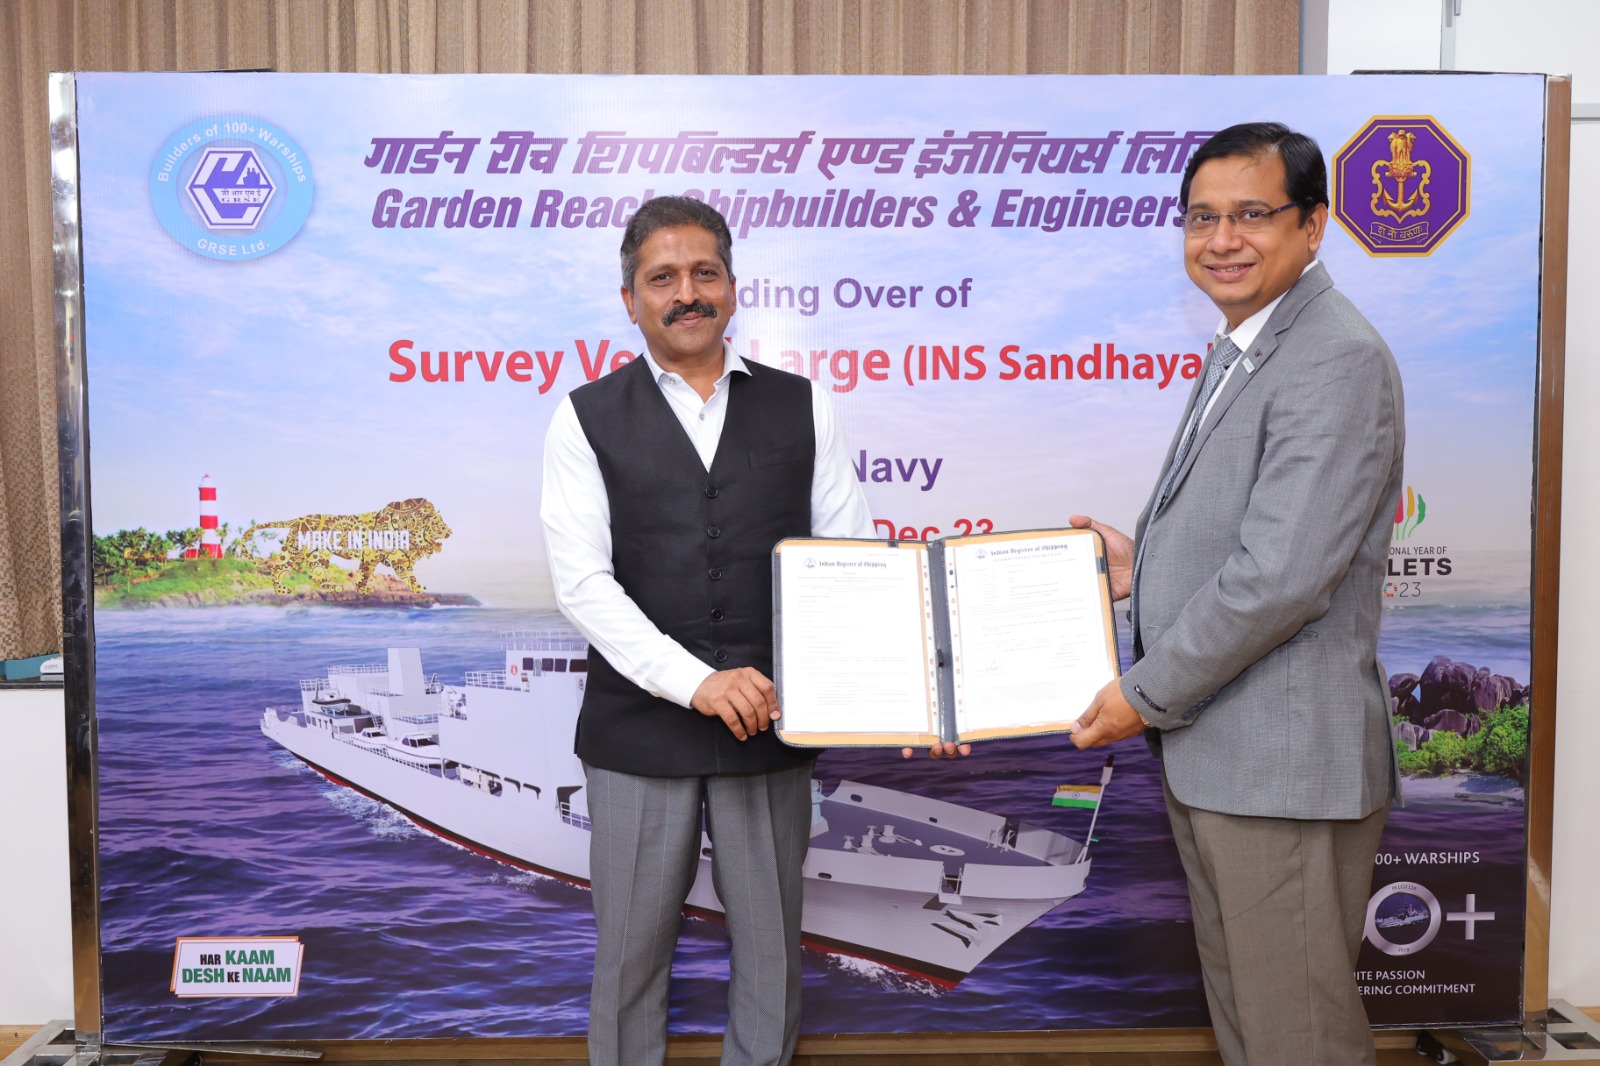 IRS hands over Class Certificate for SVL (Yard 3025) on 07 Dec 23